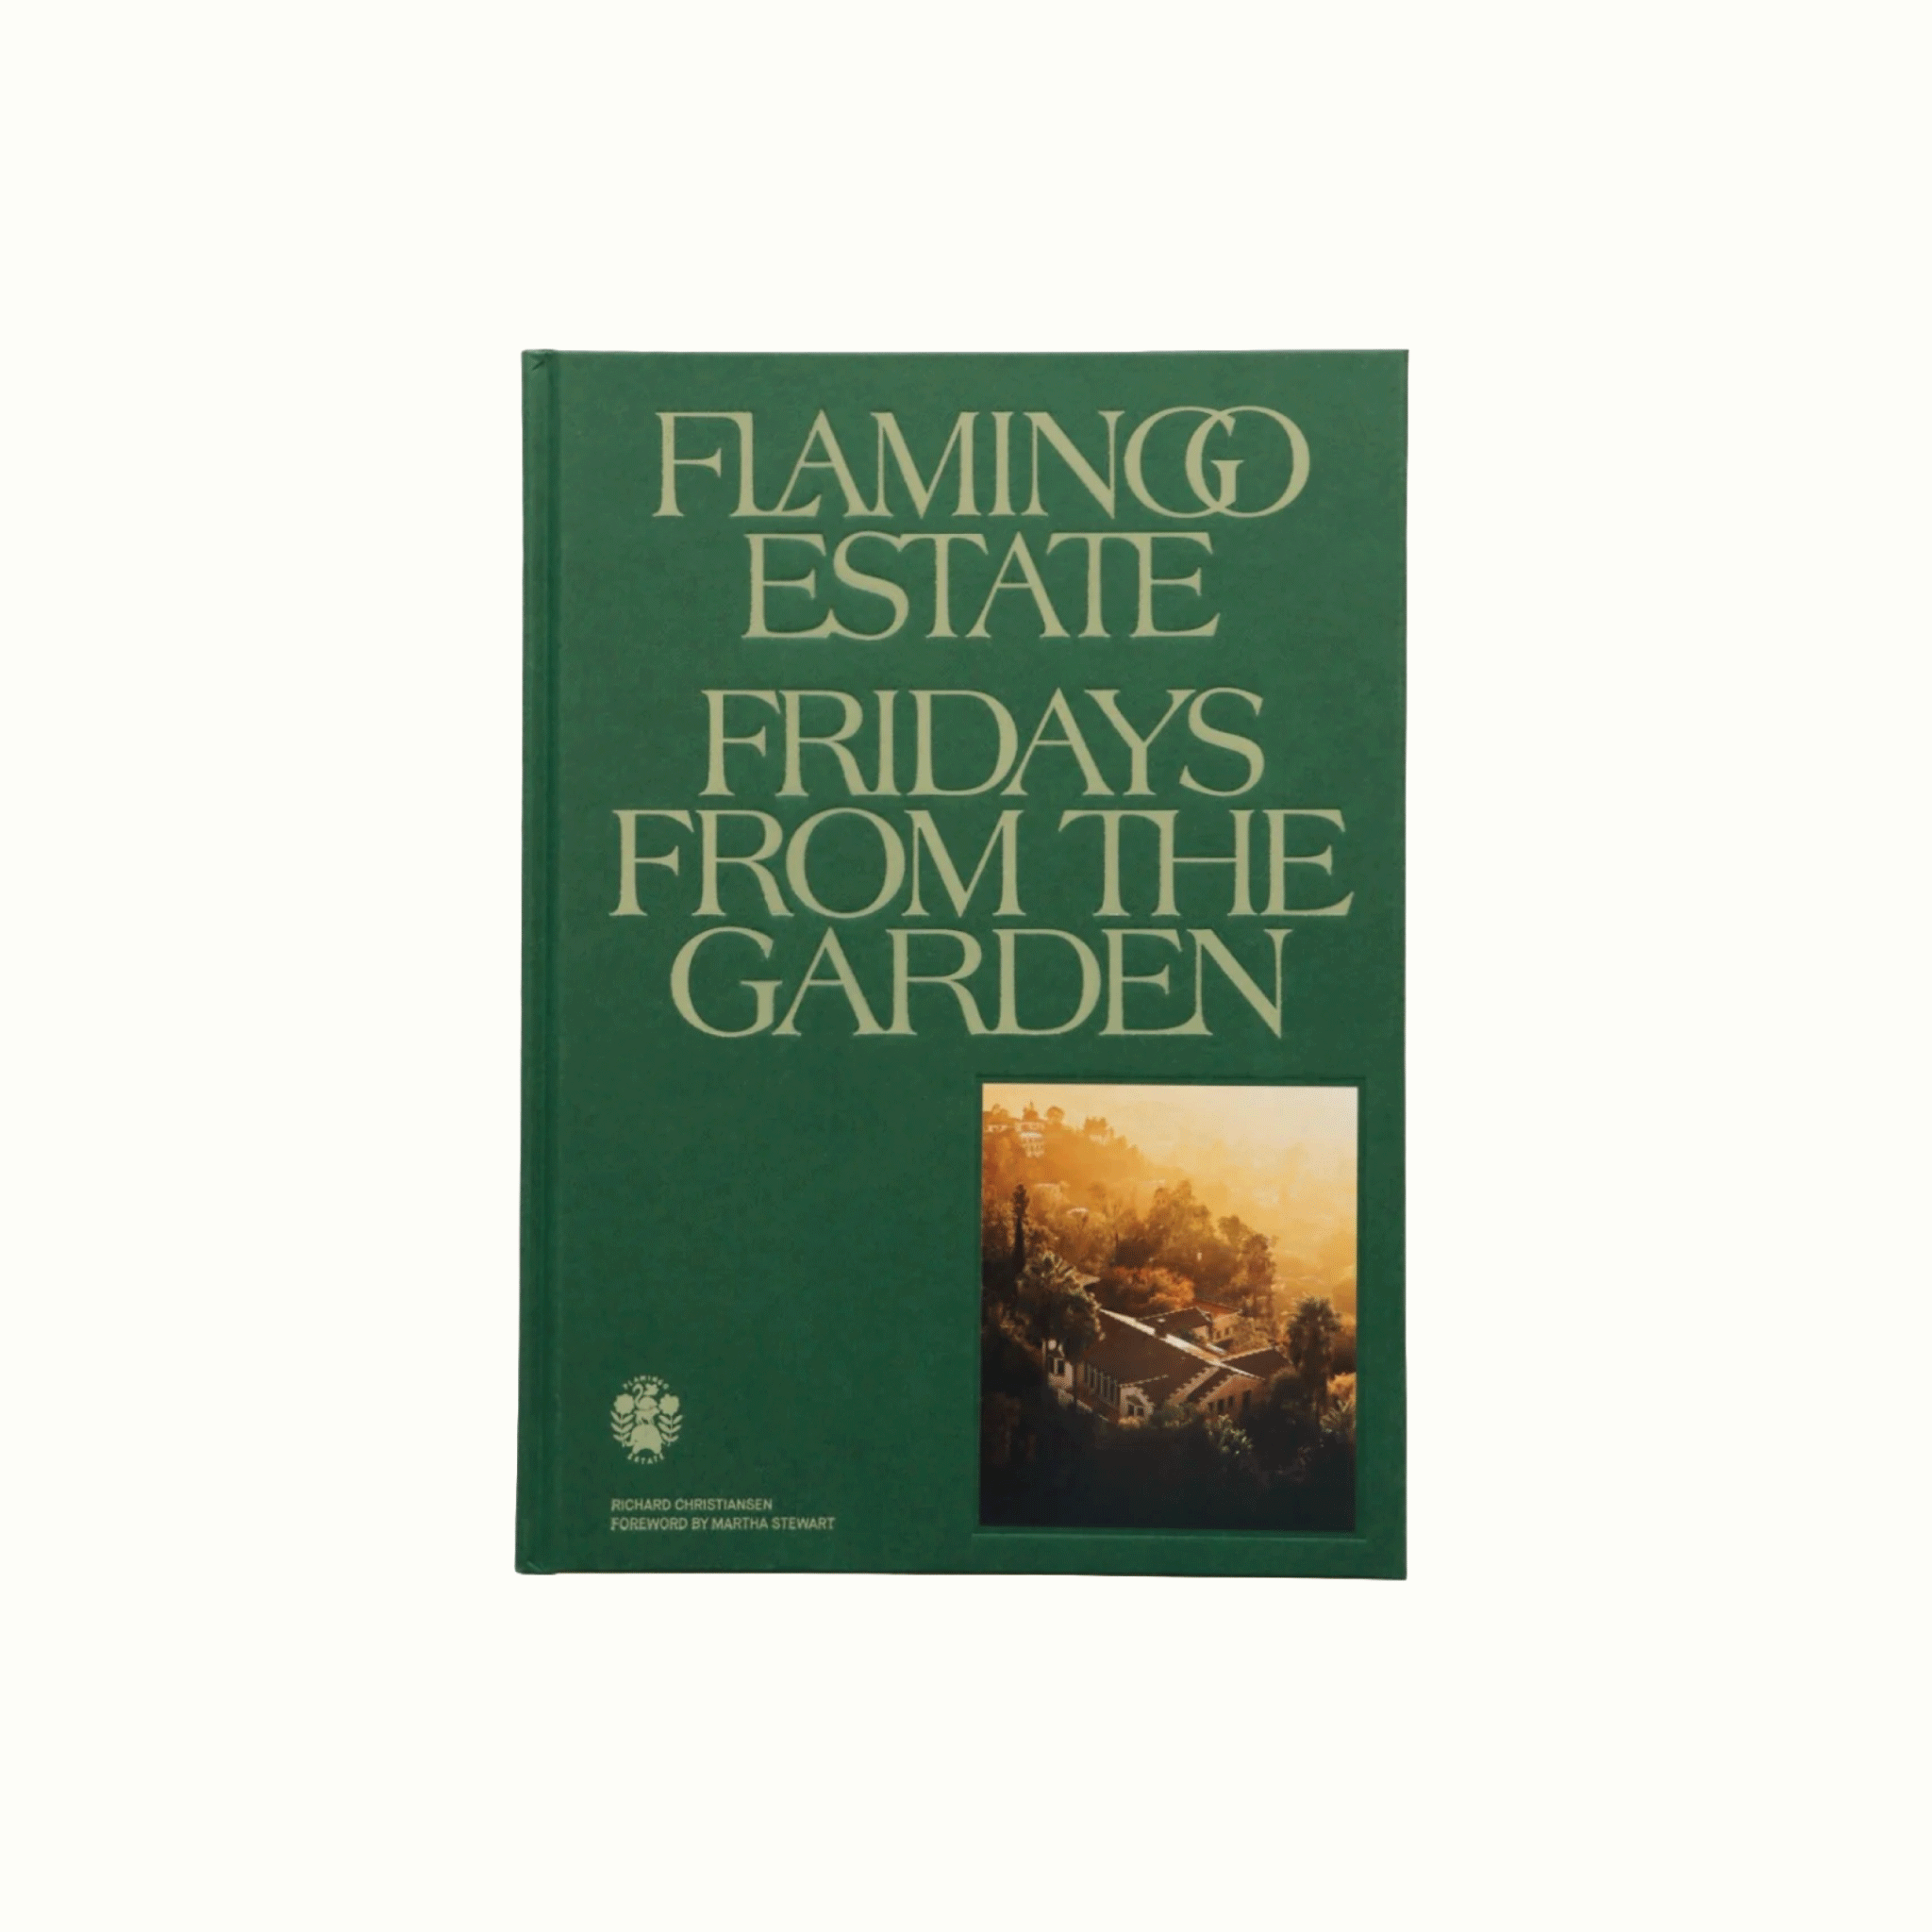 Fridays From The Garden Book by Flamingo Estate For Granada by Nomada Deco